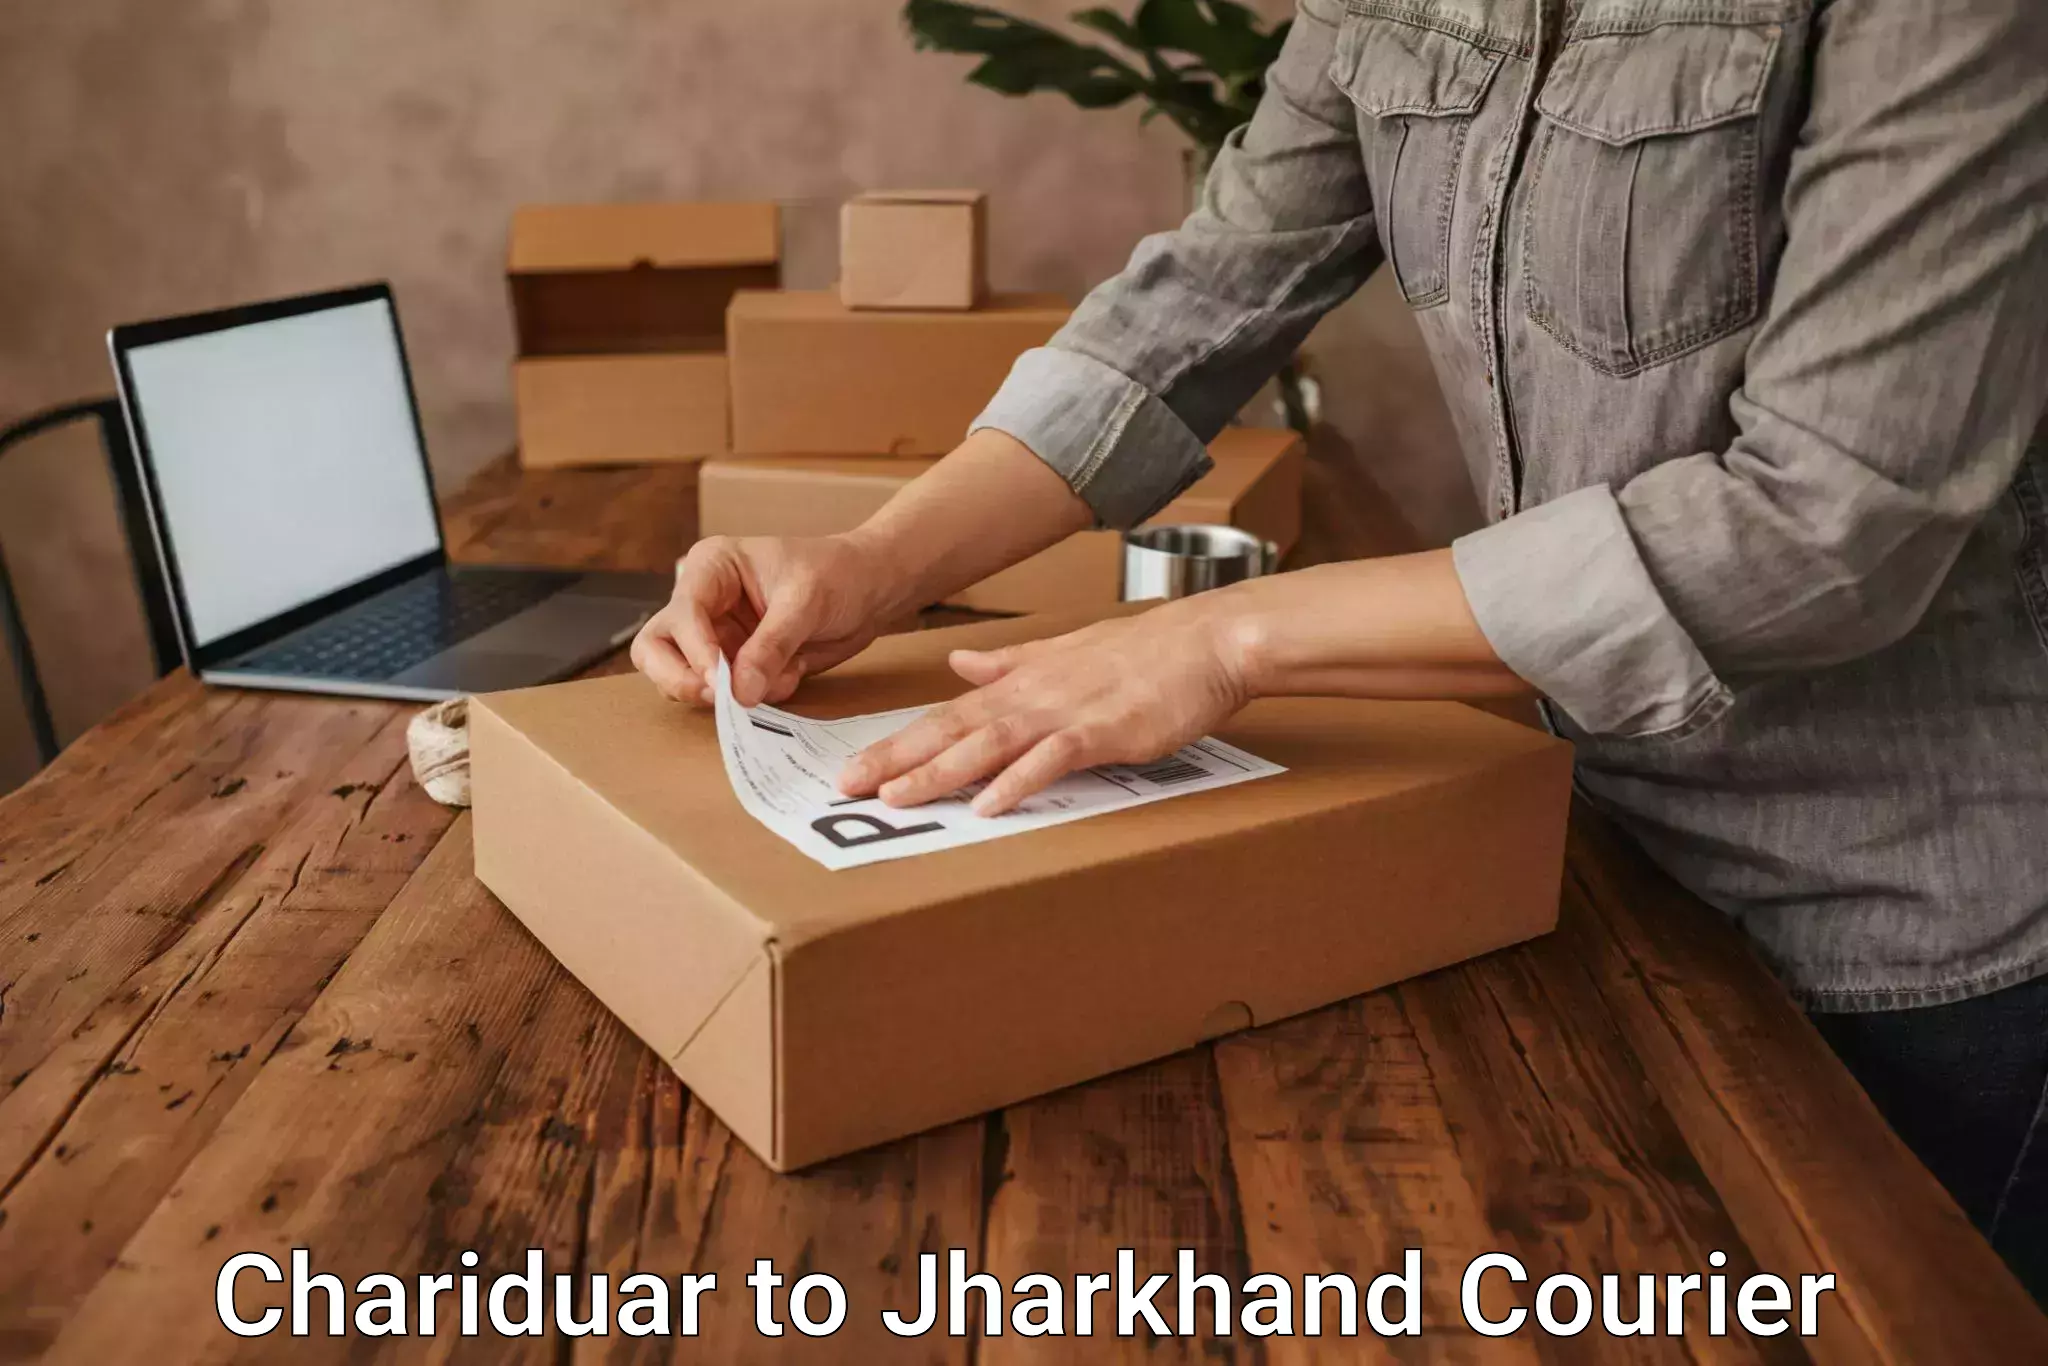 Advanced delivery network Chariduar to Jamshedpur